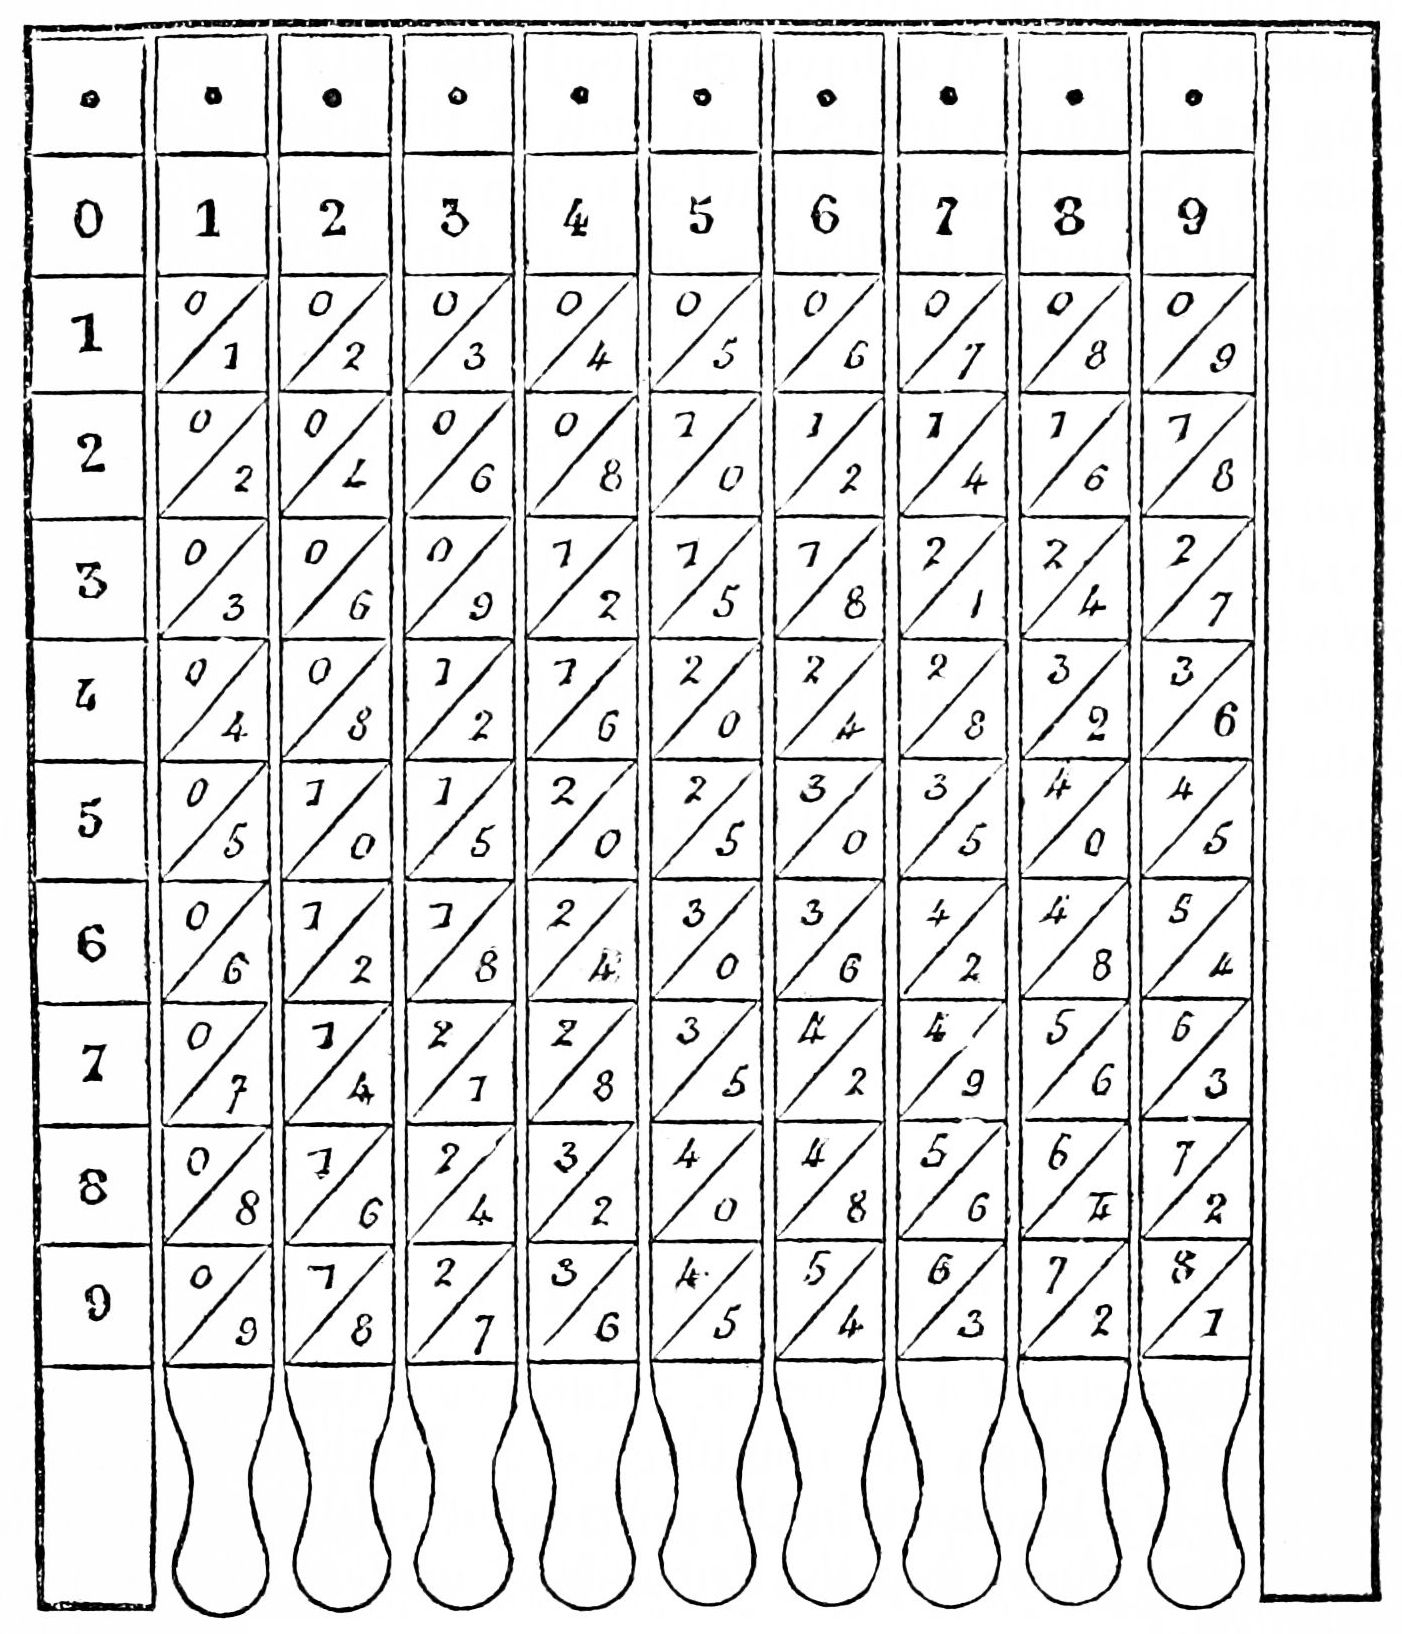 Multiplication Table - Wikiwand